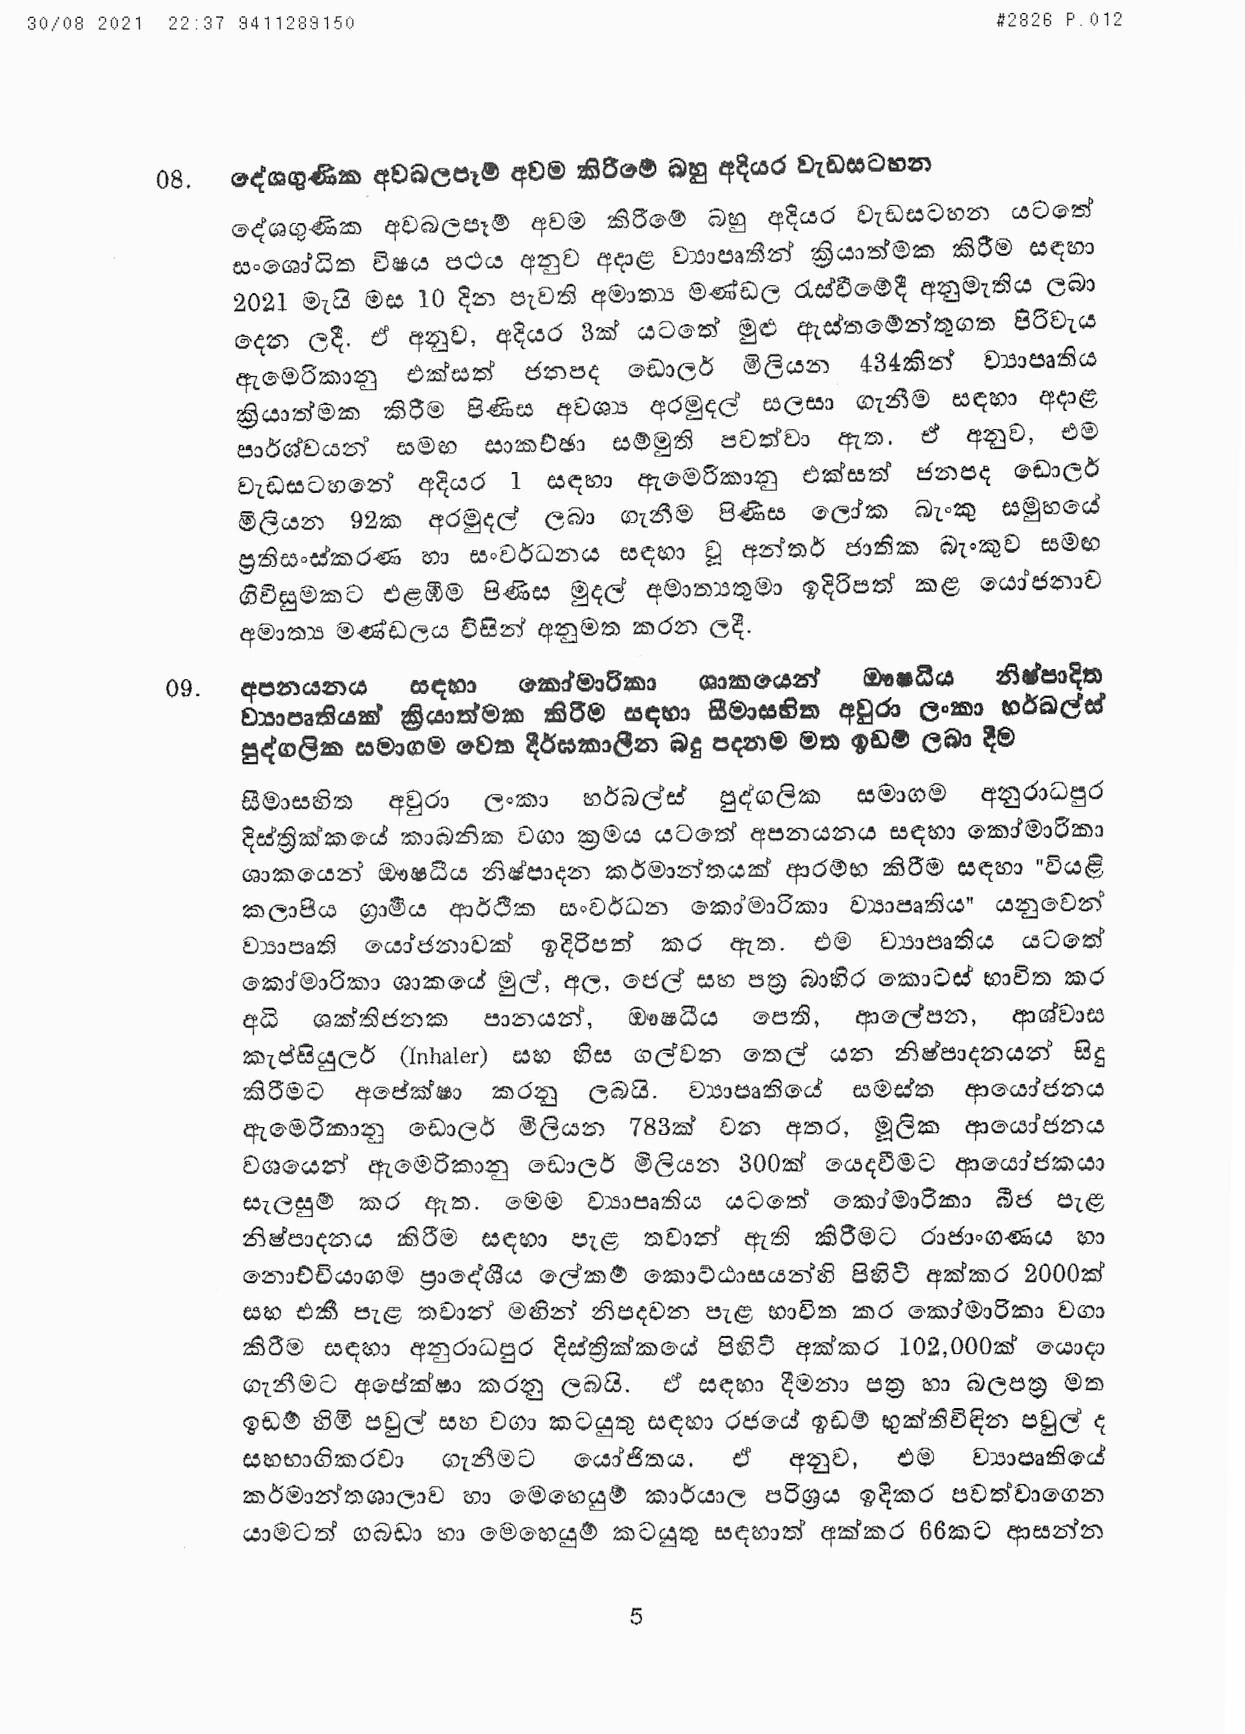 Cabinet Decision on 30.08.2021 Sinhala page 005